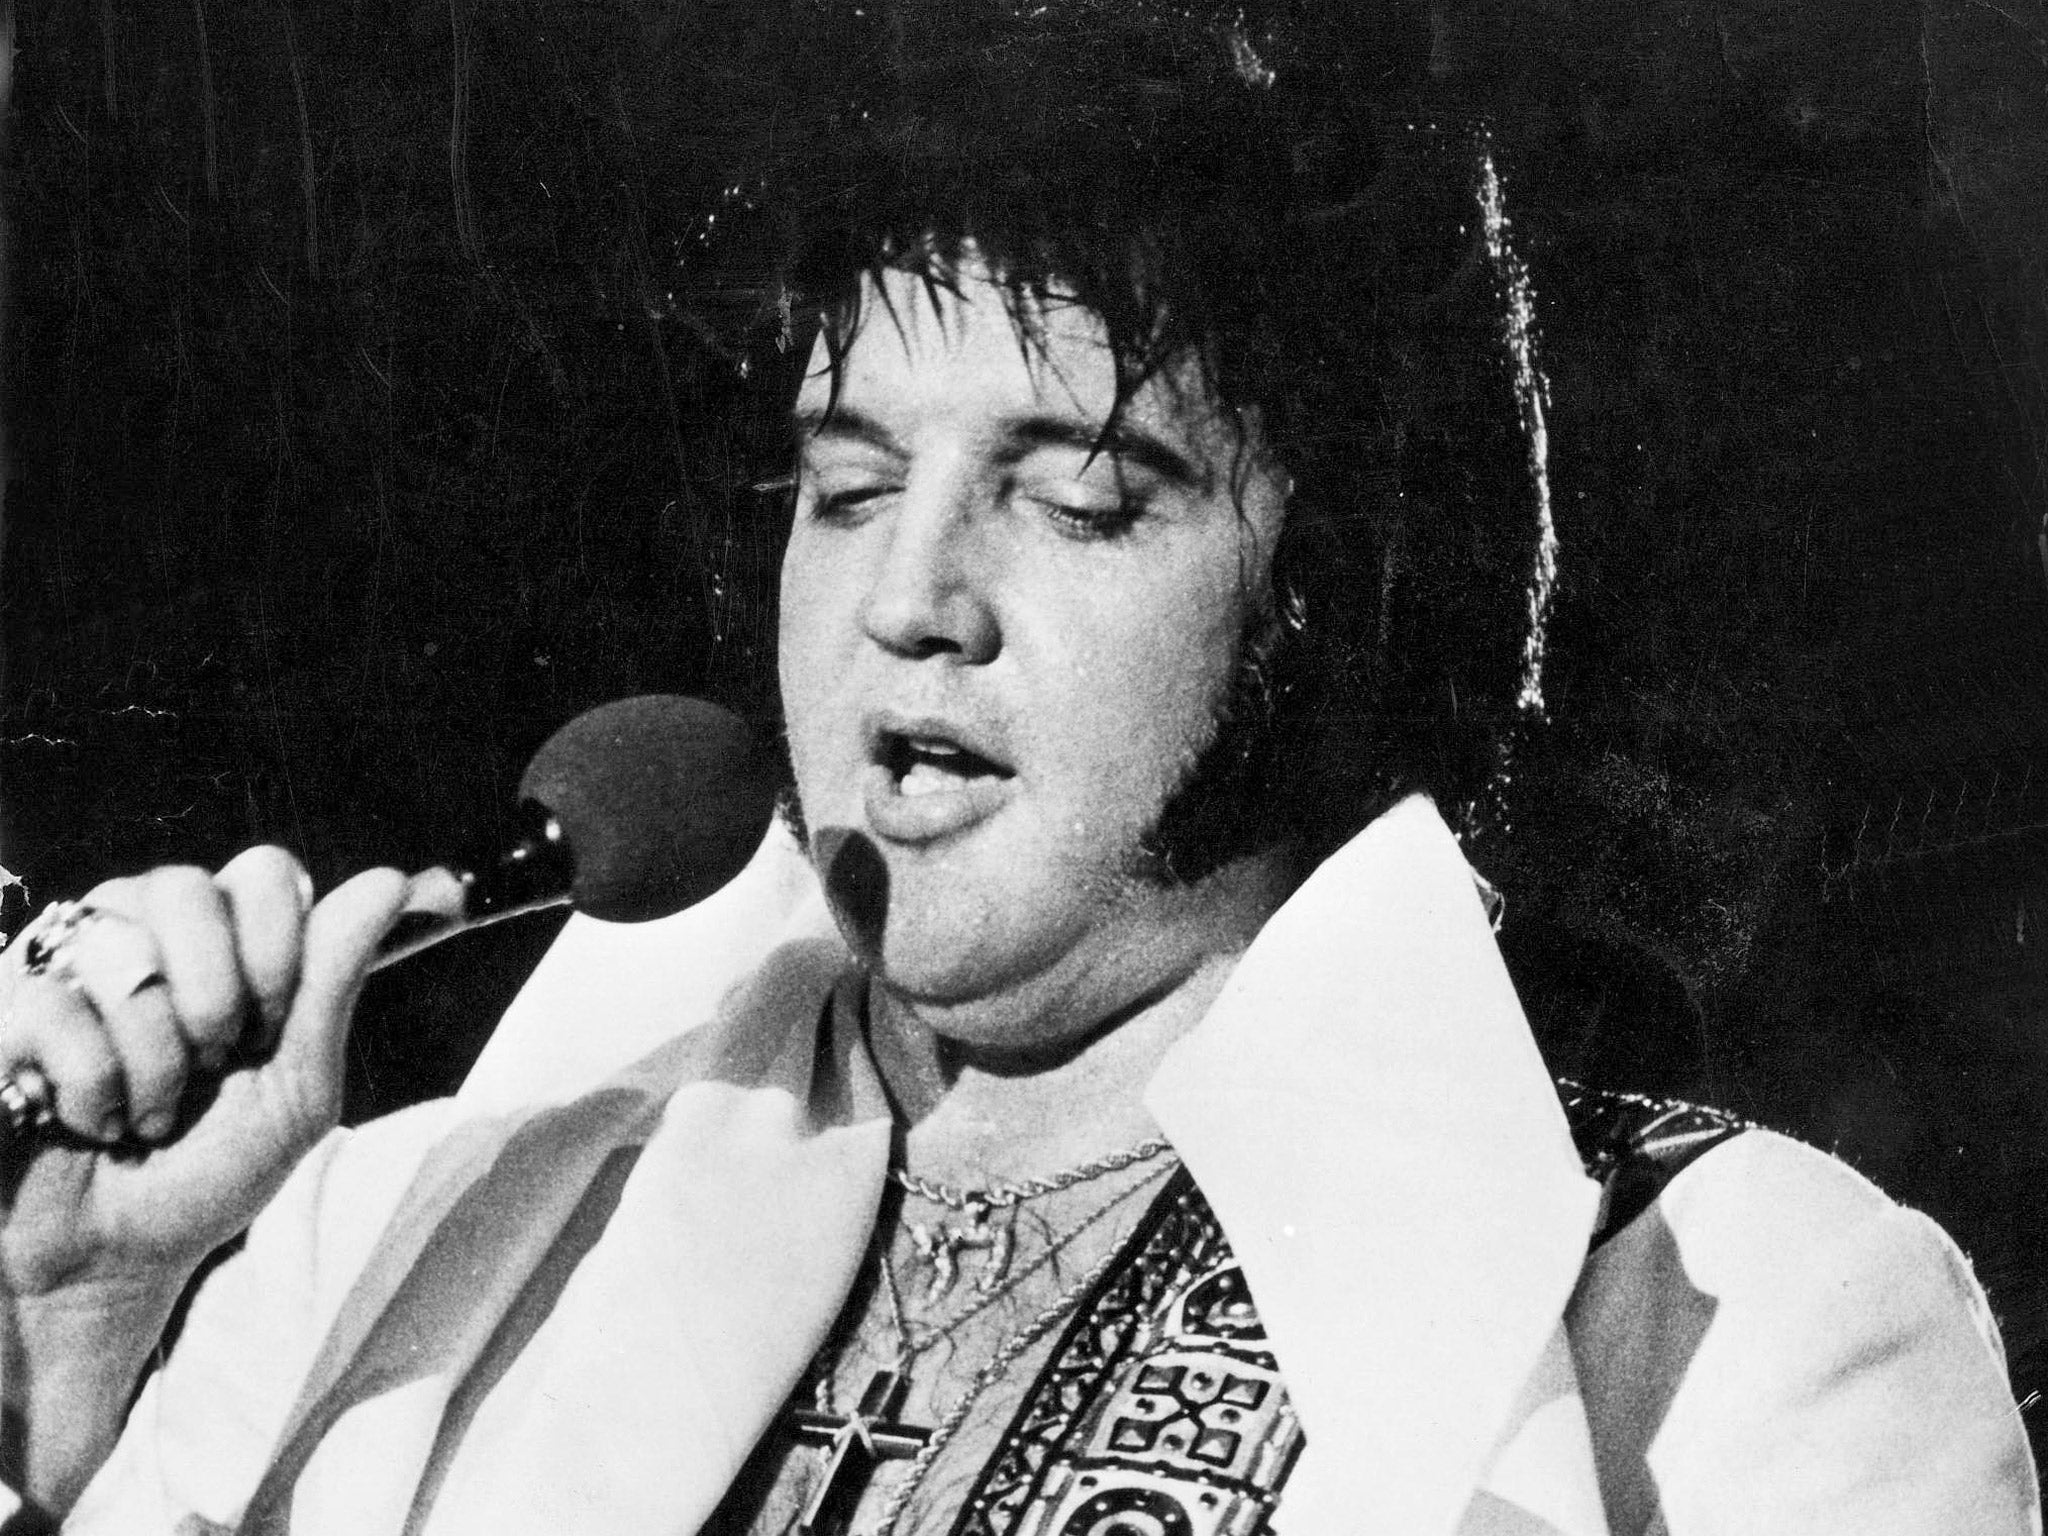 Was Elvis Presley destined to die early? DNA tests show King was prone ...